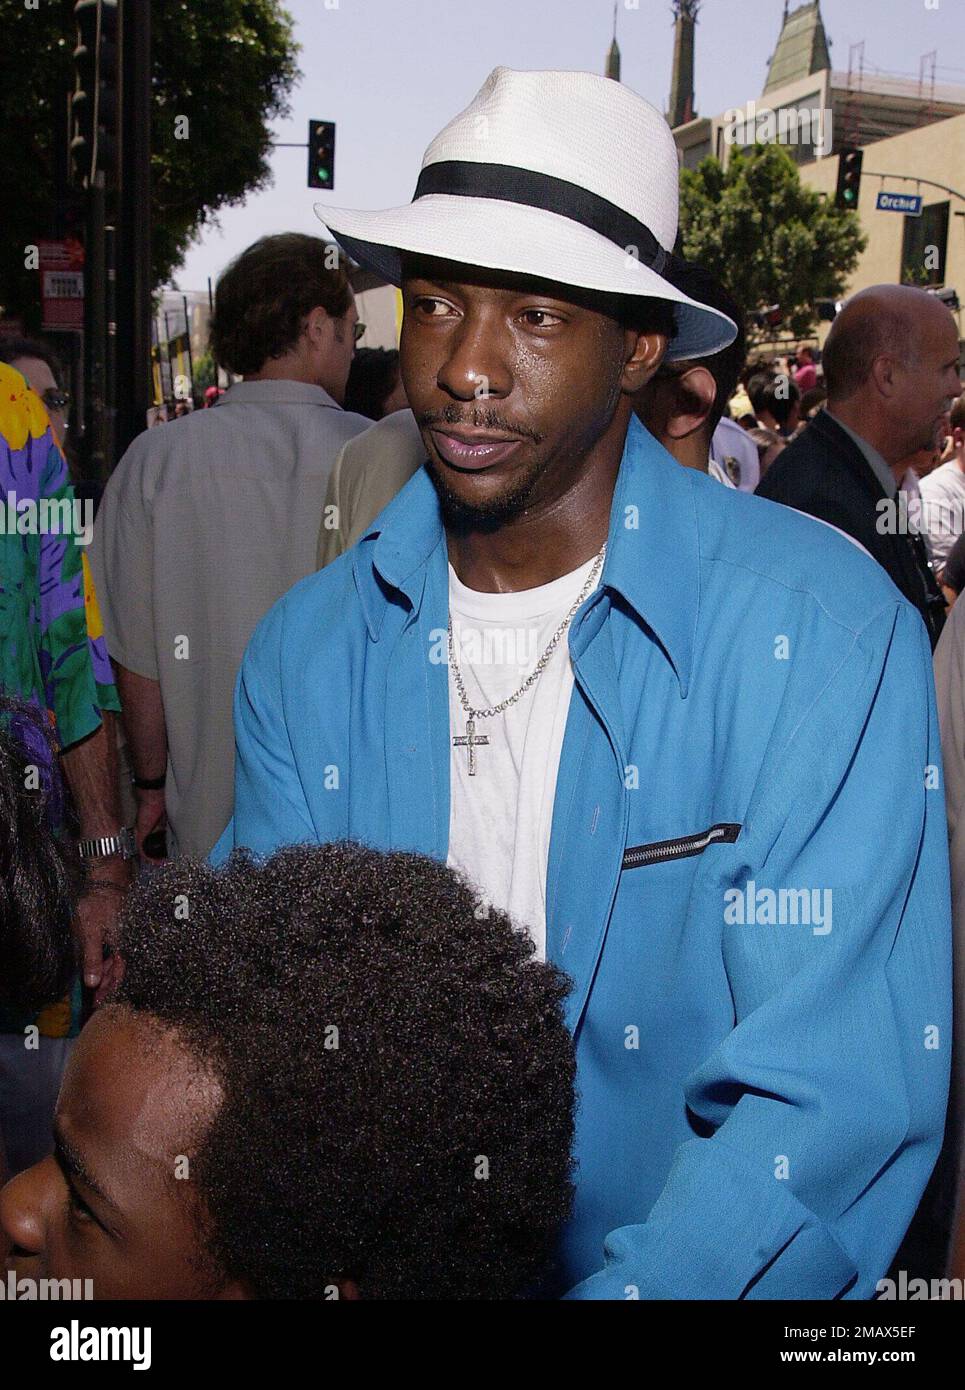 Bobby Brown - Whitney Houston produced the movie - arriving at the 'Princess Diaries' premiere at El captain Theatre in Los Angeles  July, 29, 2001            -            BrownBobby02.jpgEvent in Hollywood Life - California, Red Carpet Event, USA, Film Industry, Celebrities, Photography, Bestof, Arts Culture and Entertainment, Topix Celebrities fashion, Best of, Hollywood Life, Event in Hollywood Life - California, Red Carpet and backstage, , Music celebrities, Musician, Music Group, Topix, Bestof, Arts Culture and Entertainment, Photography, People from the cast, TV show and cast inquiry tsu Stock Photo